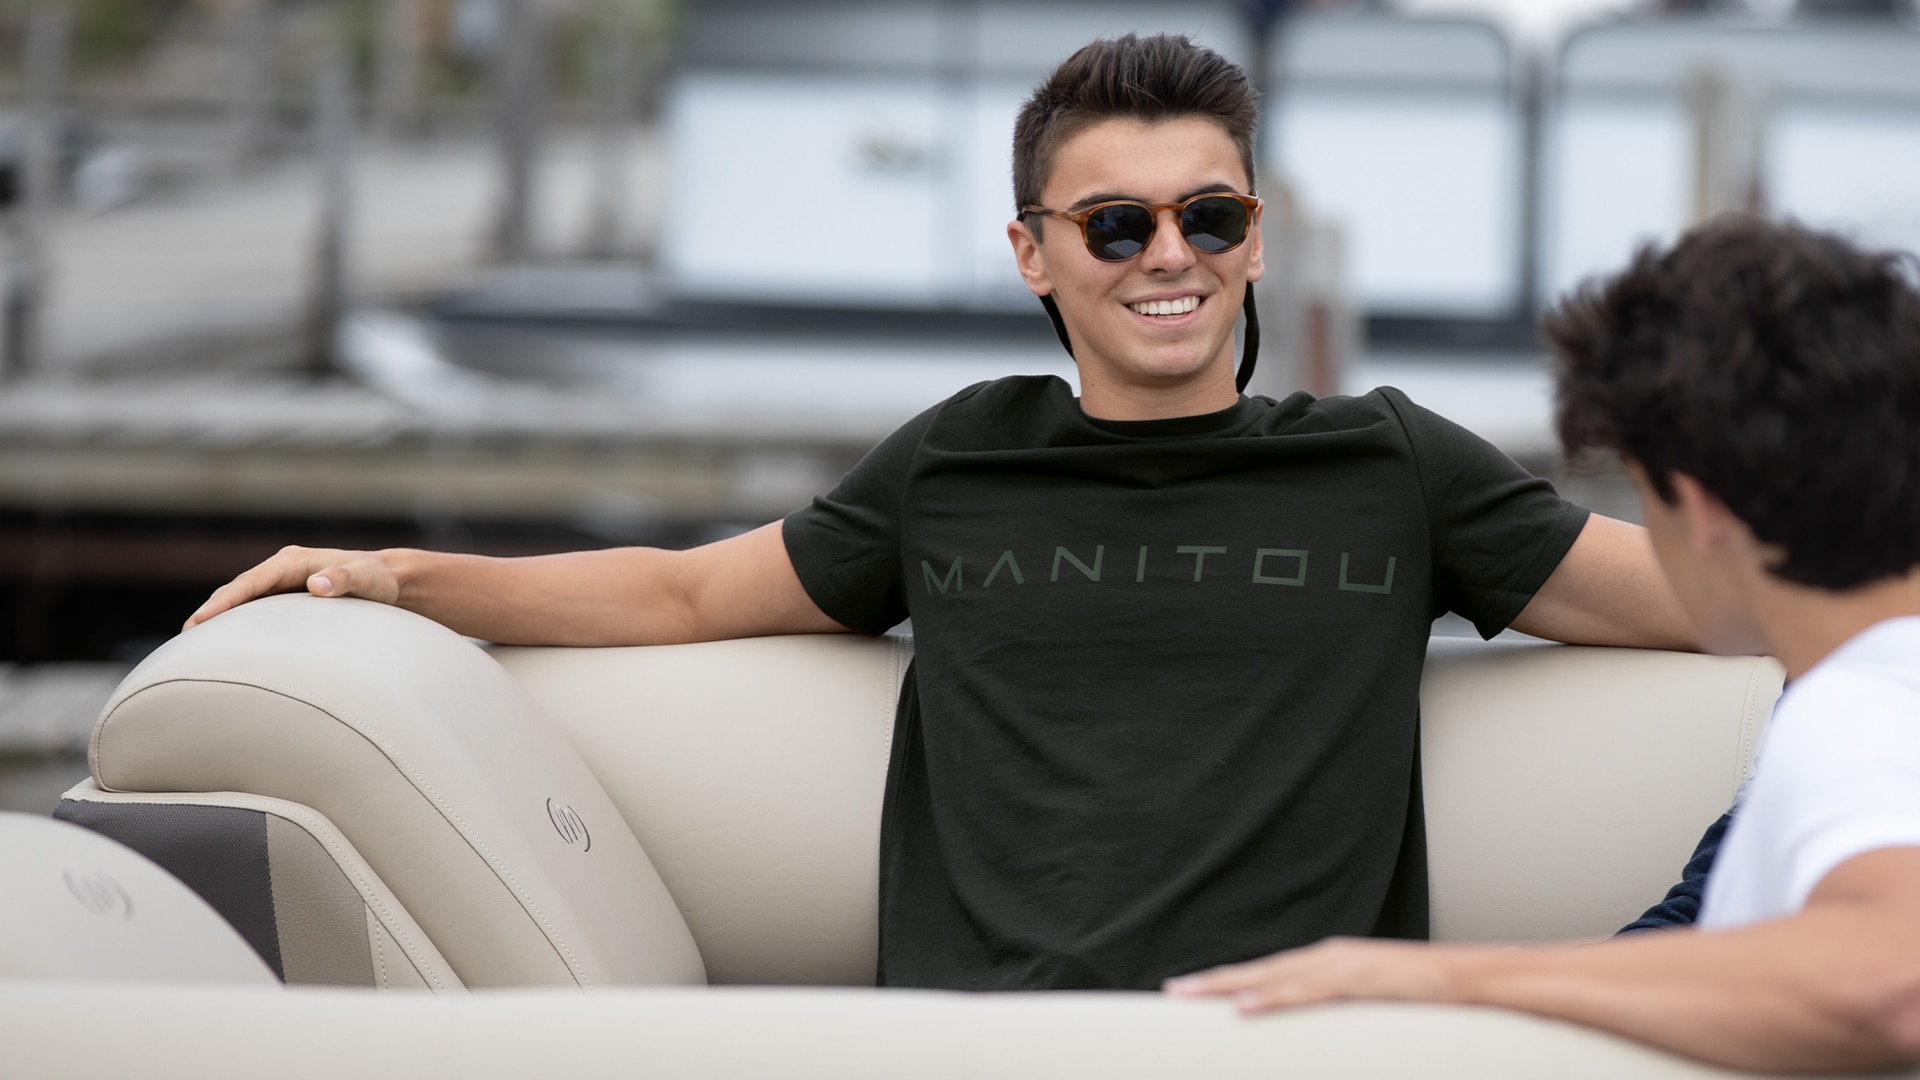 Passenger wearing a new Manitou branded shirt